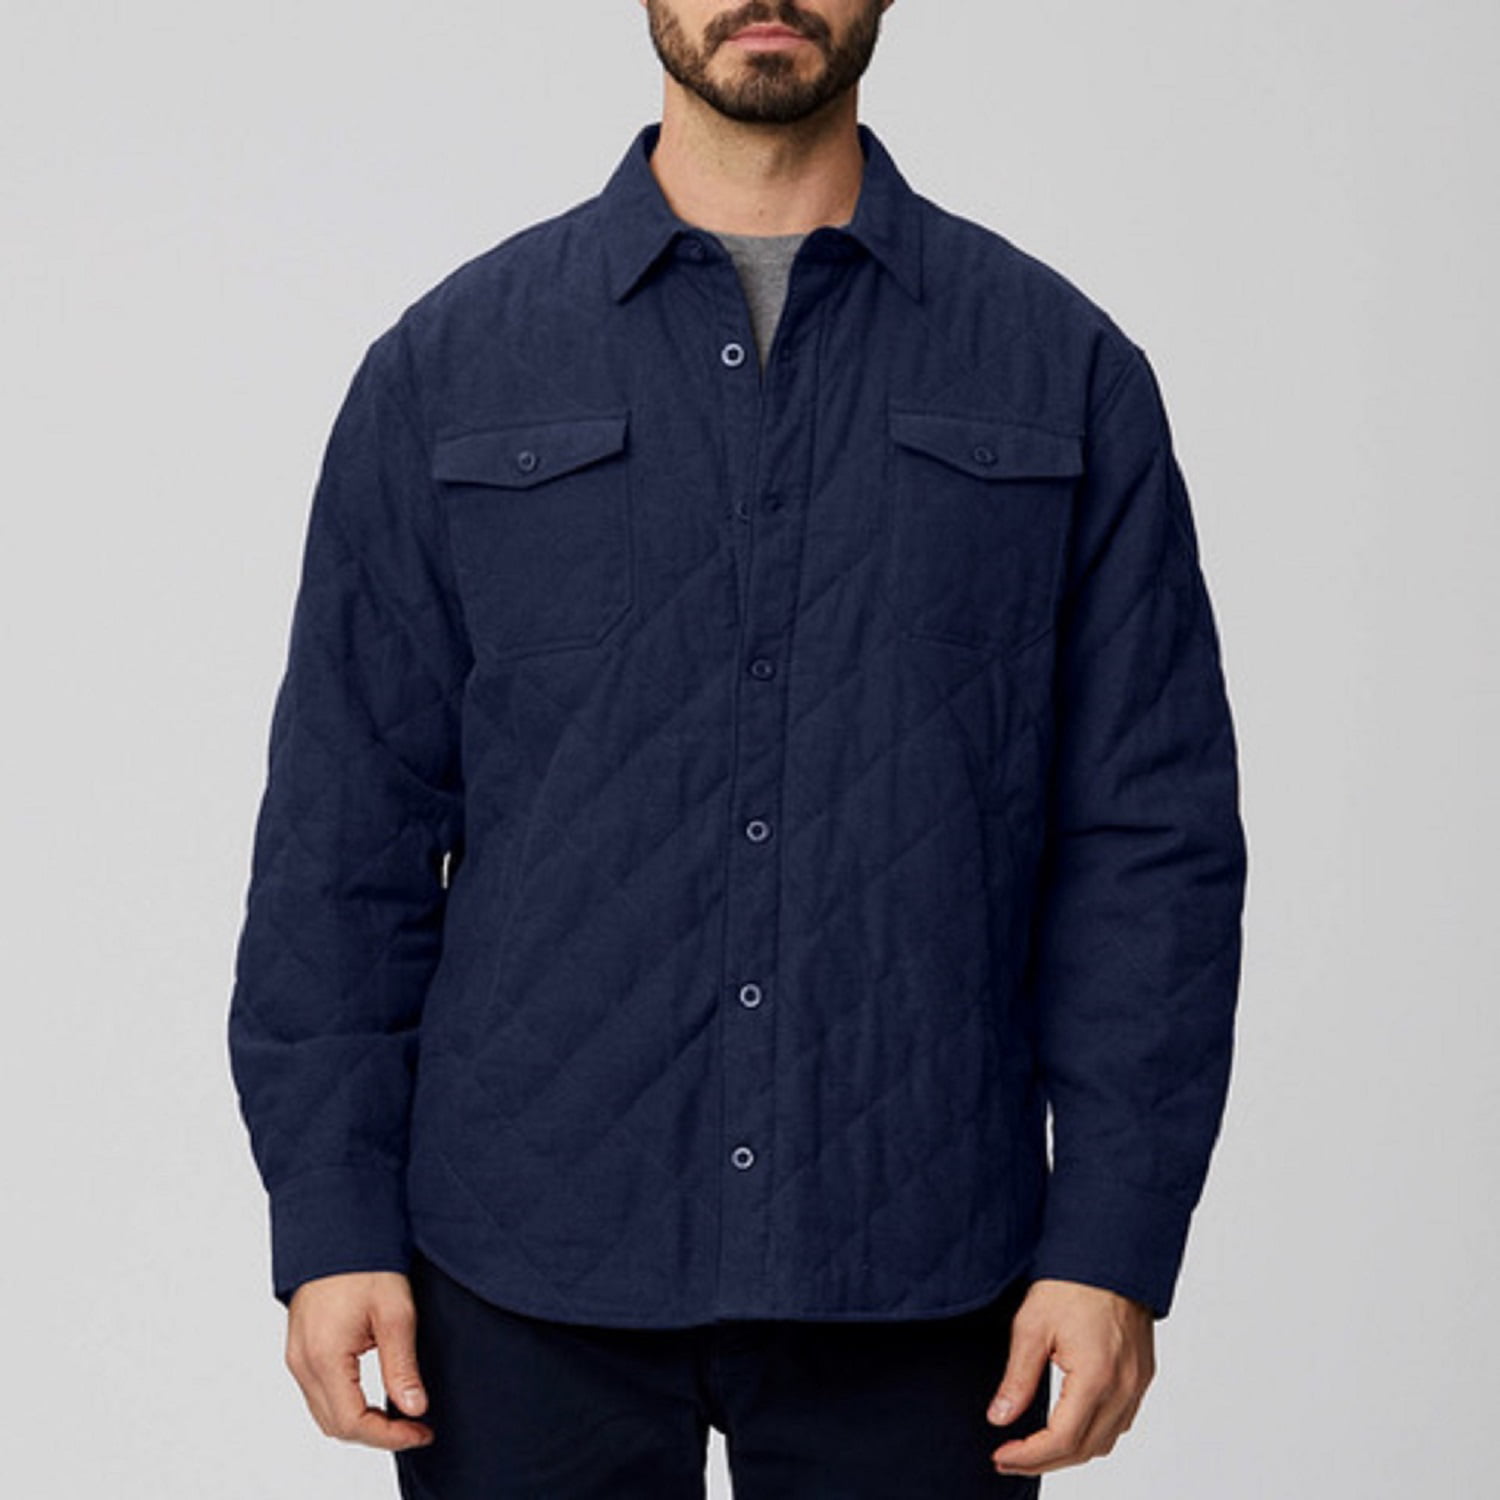 Sale > walmart men's quilted flannel shirts > in stock